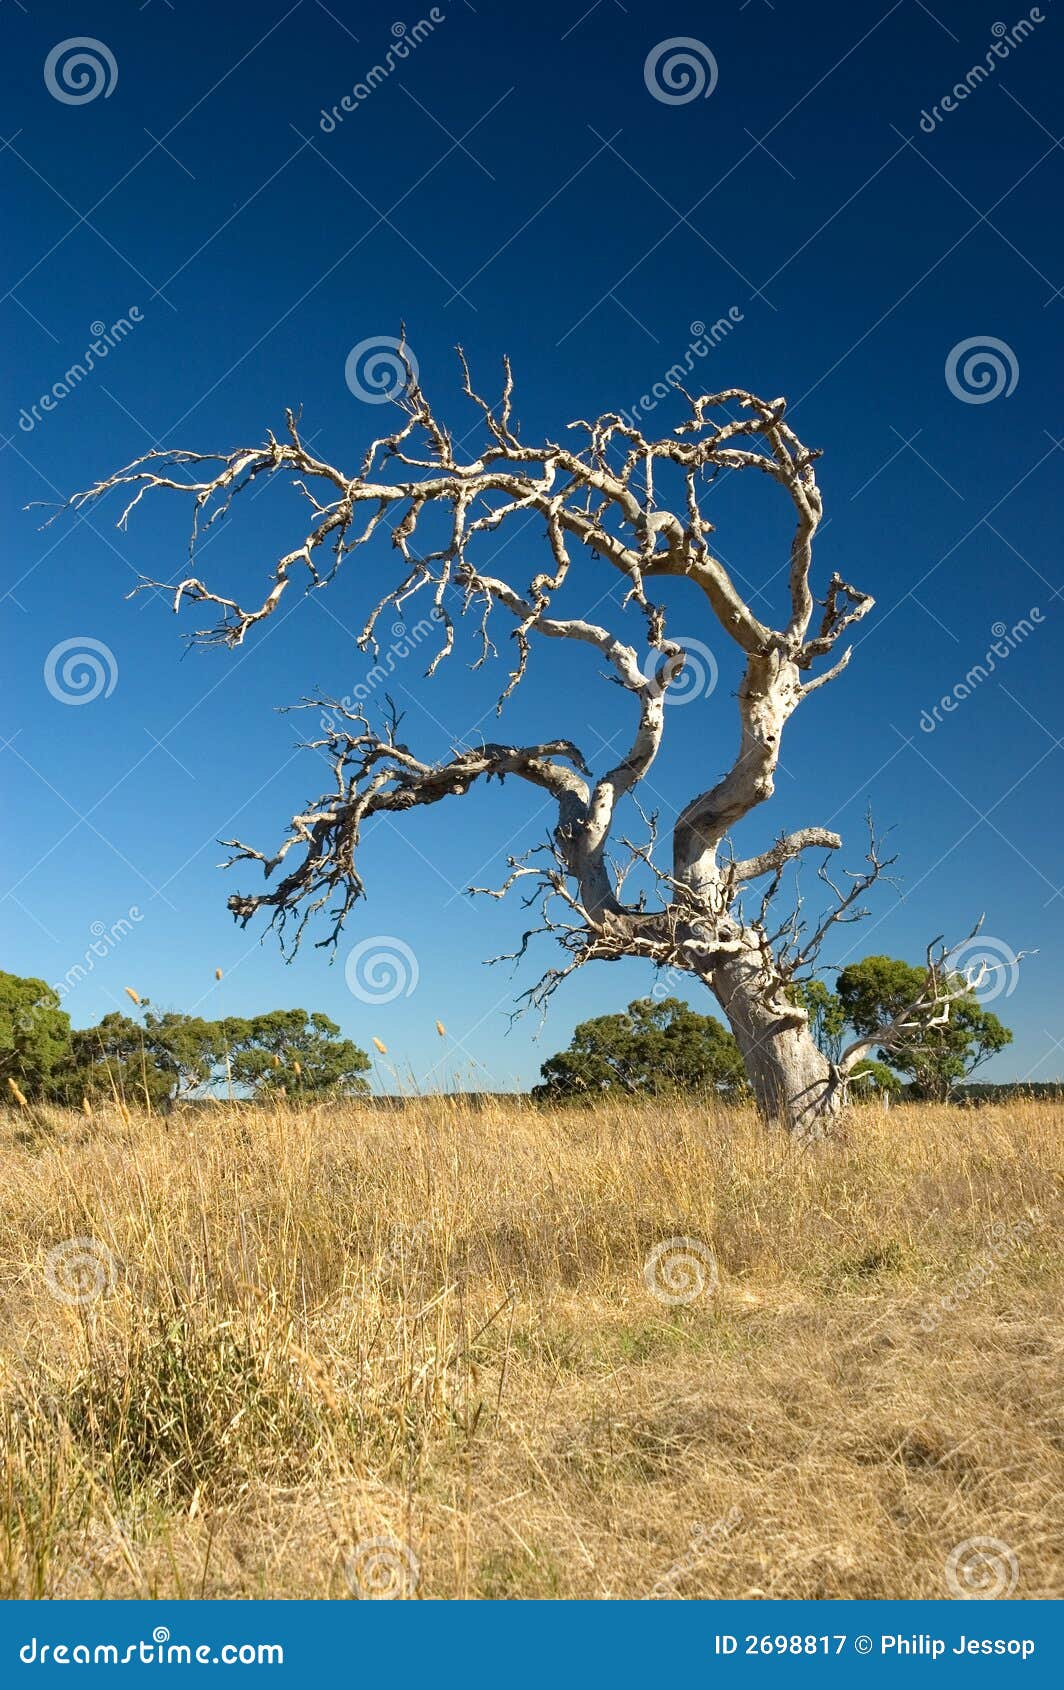 old withered tree